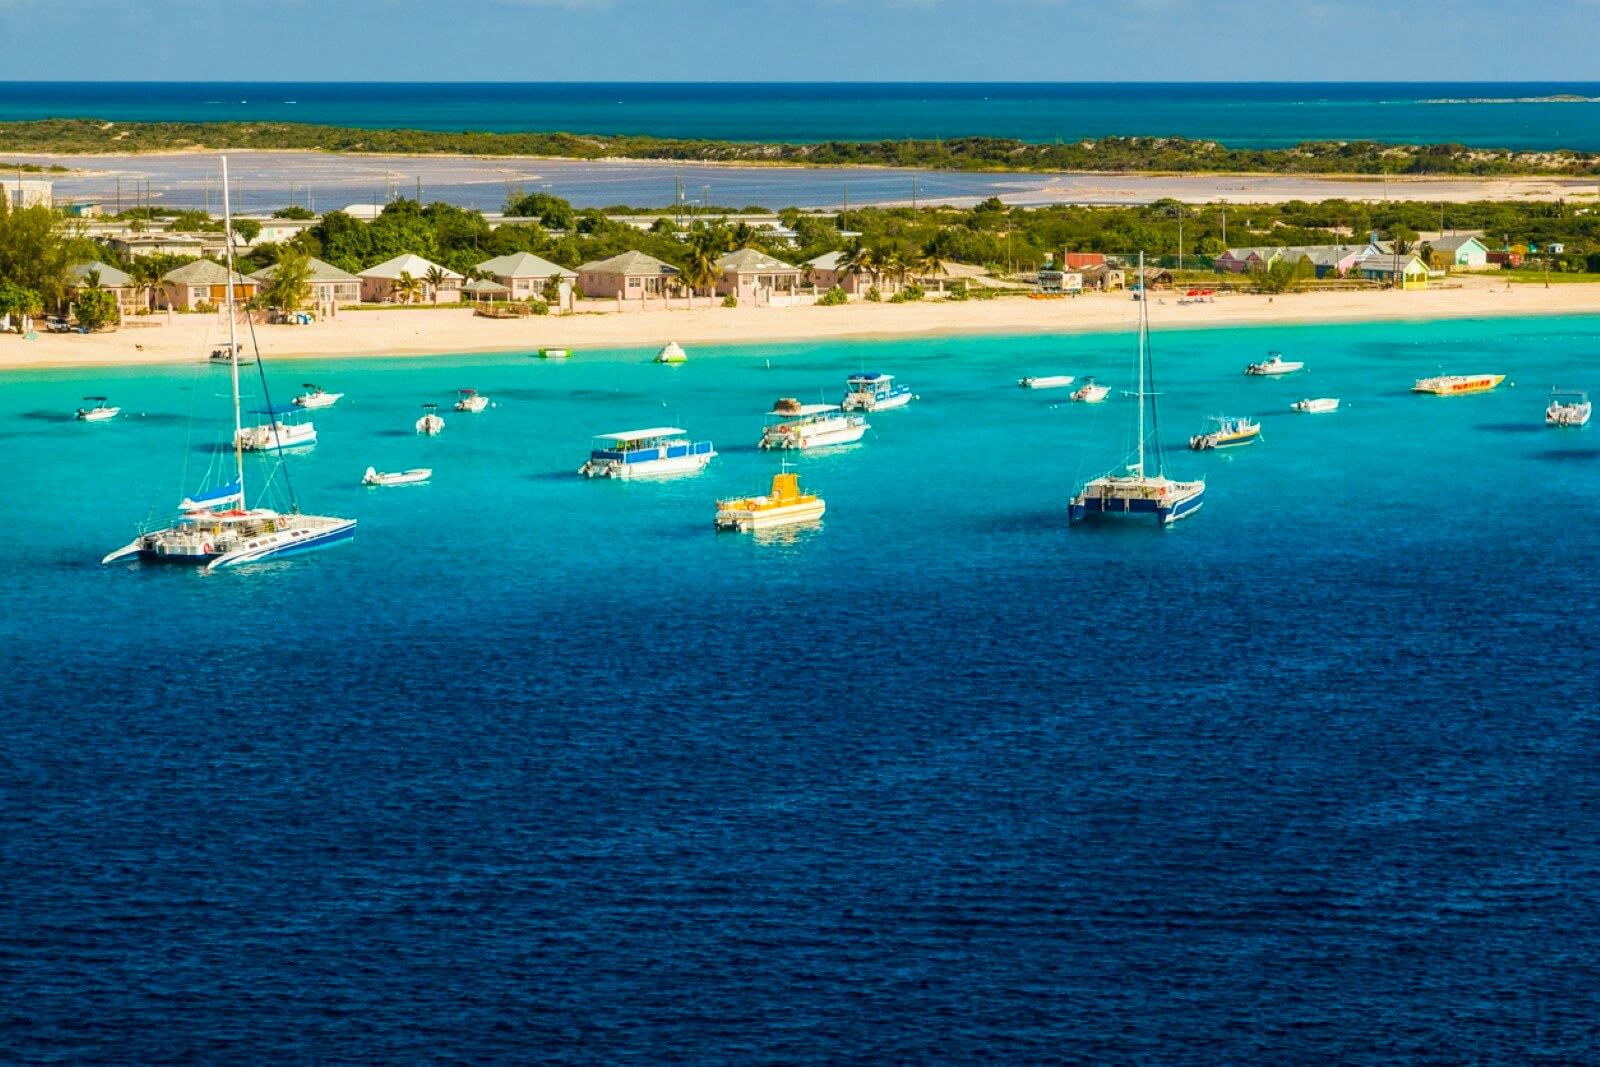 Boats off of the coast of Turks and Caicos